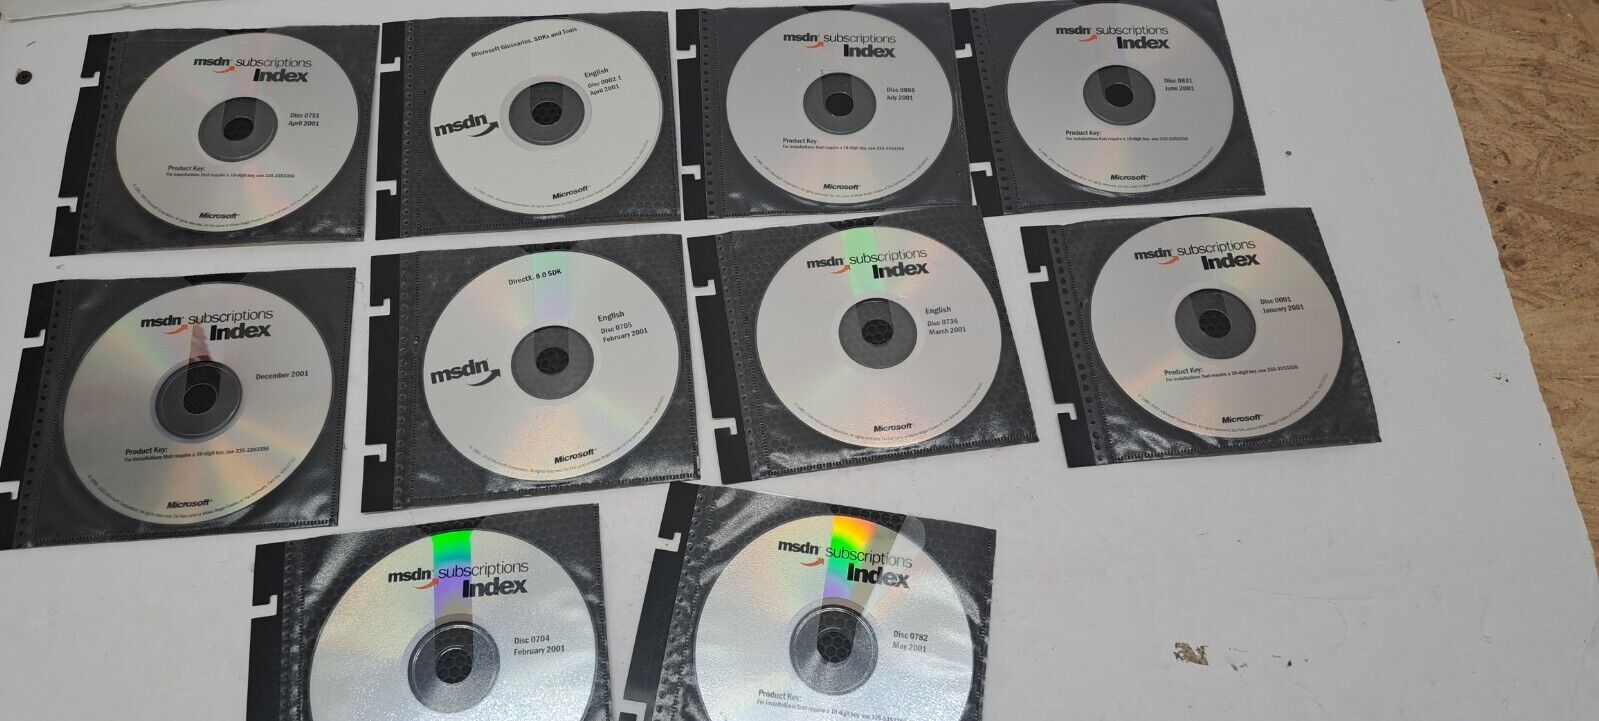 Microsoft msdn subscriptions index 2001 disk lot see pics for titles 8/2 L5